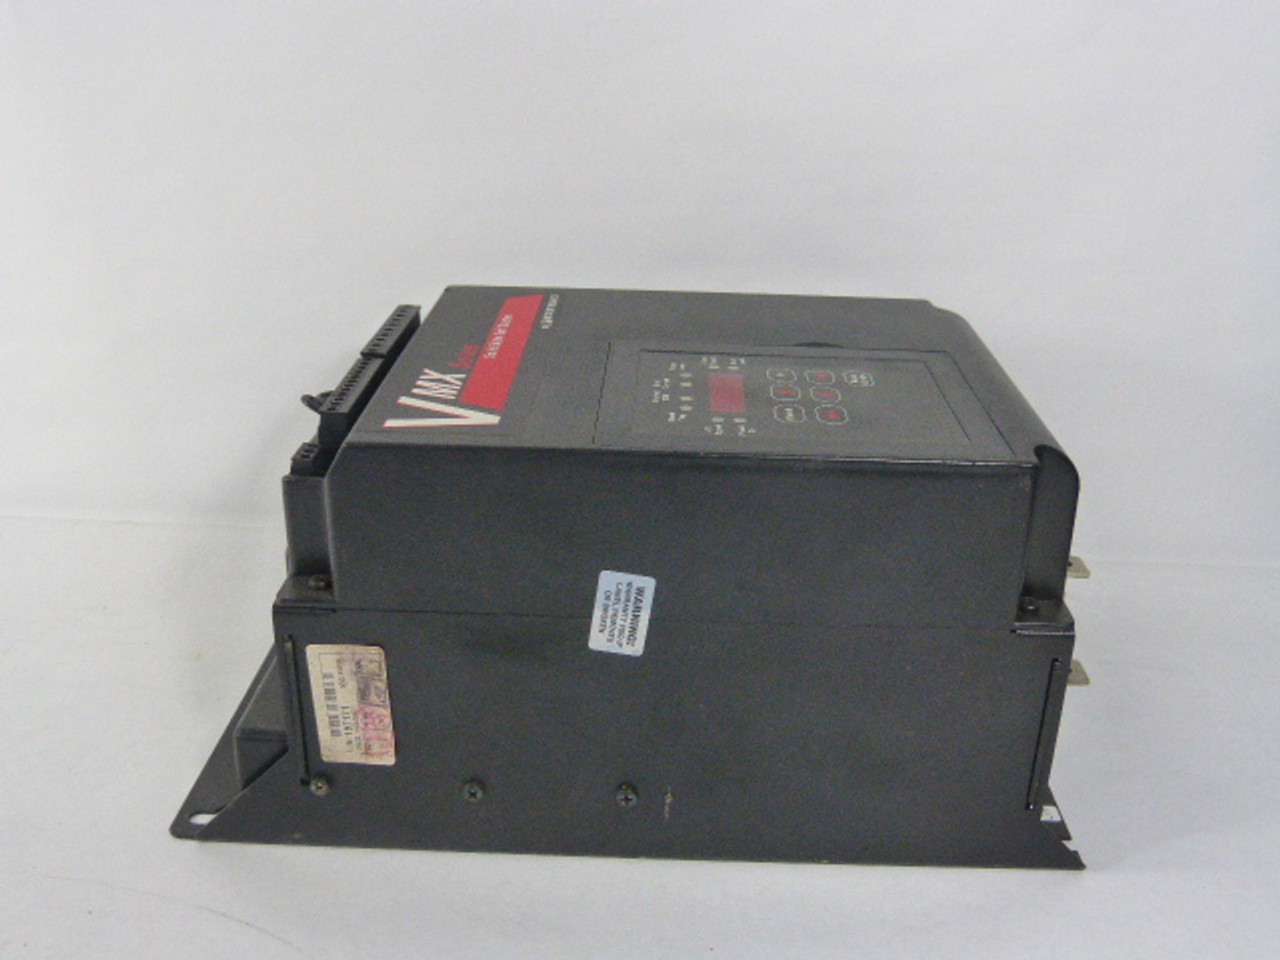 Motortronics VMX-78-BP Chassis Soft Starter 75HP 39-78A 575V USED